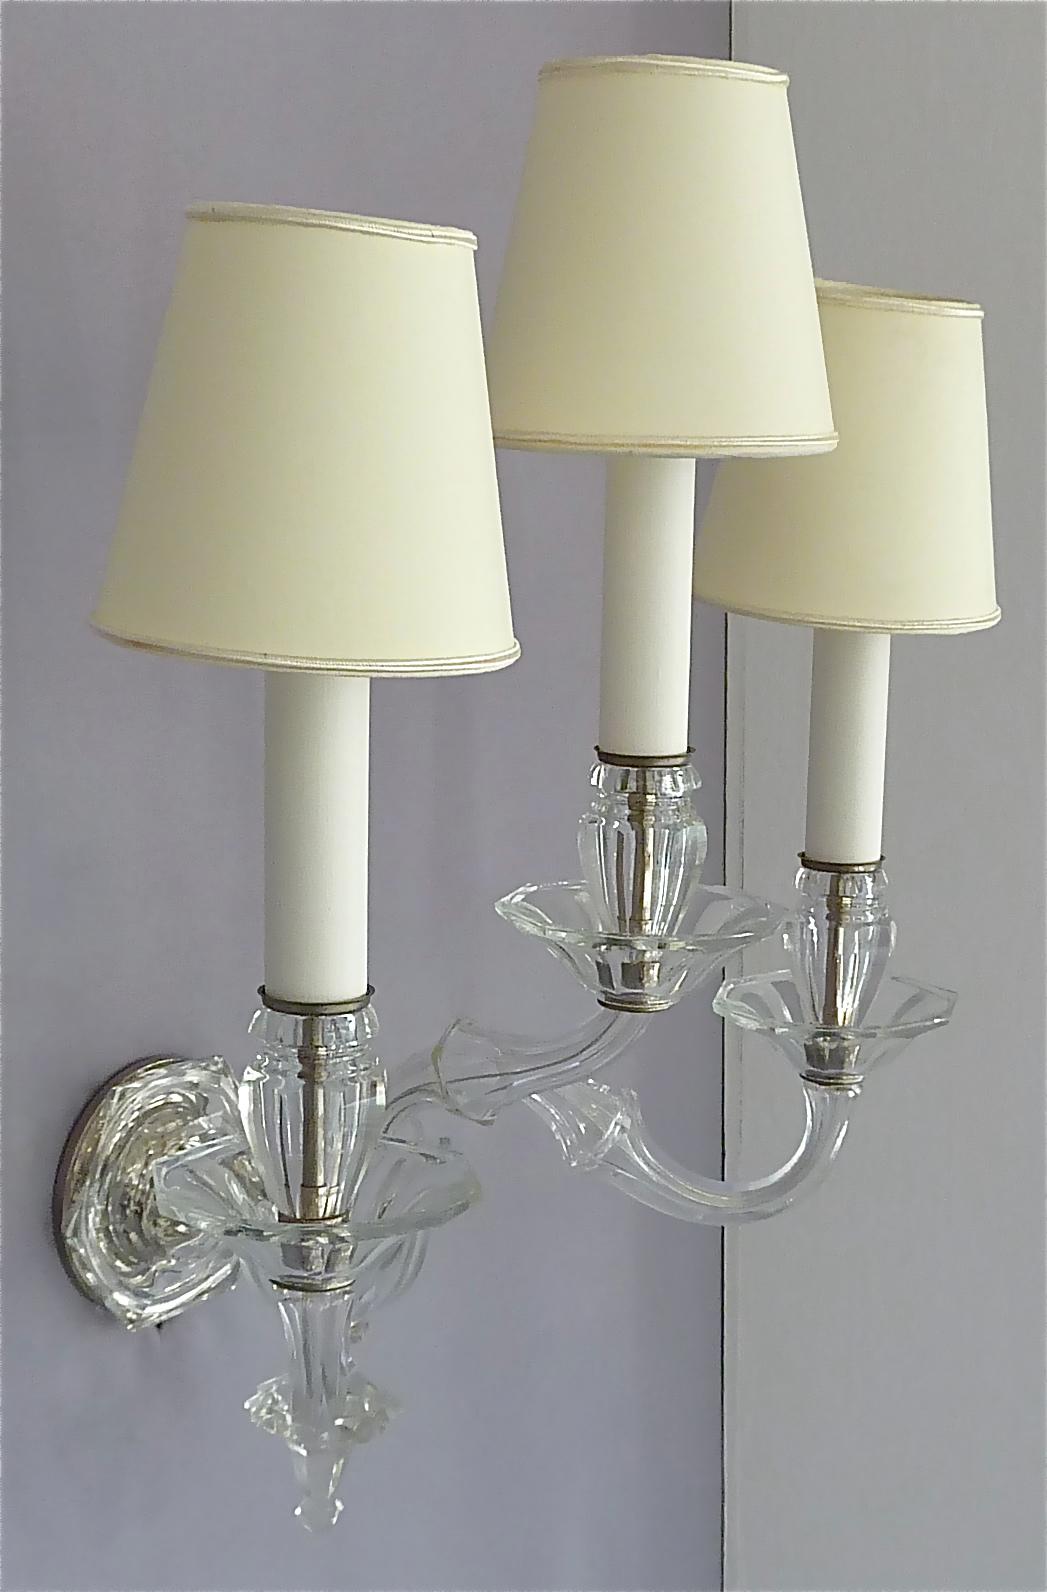 Early 20th Century Large Pair of Art Deco Faceted Crystal Glass Wall Lamps Sconces Baccarat Style For Sale